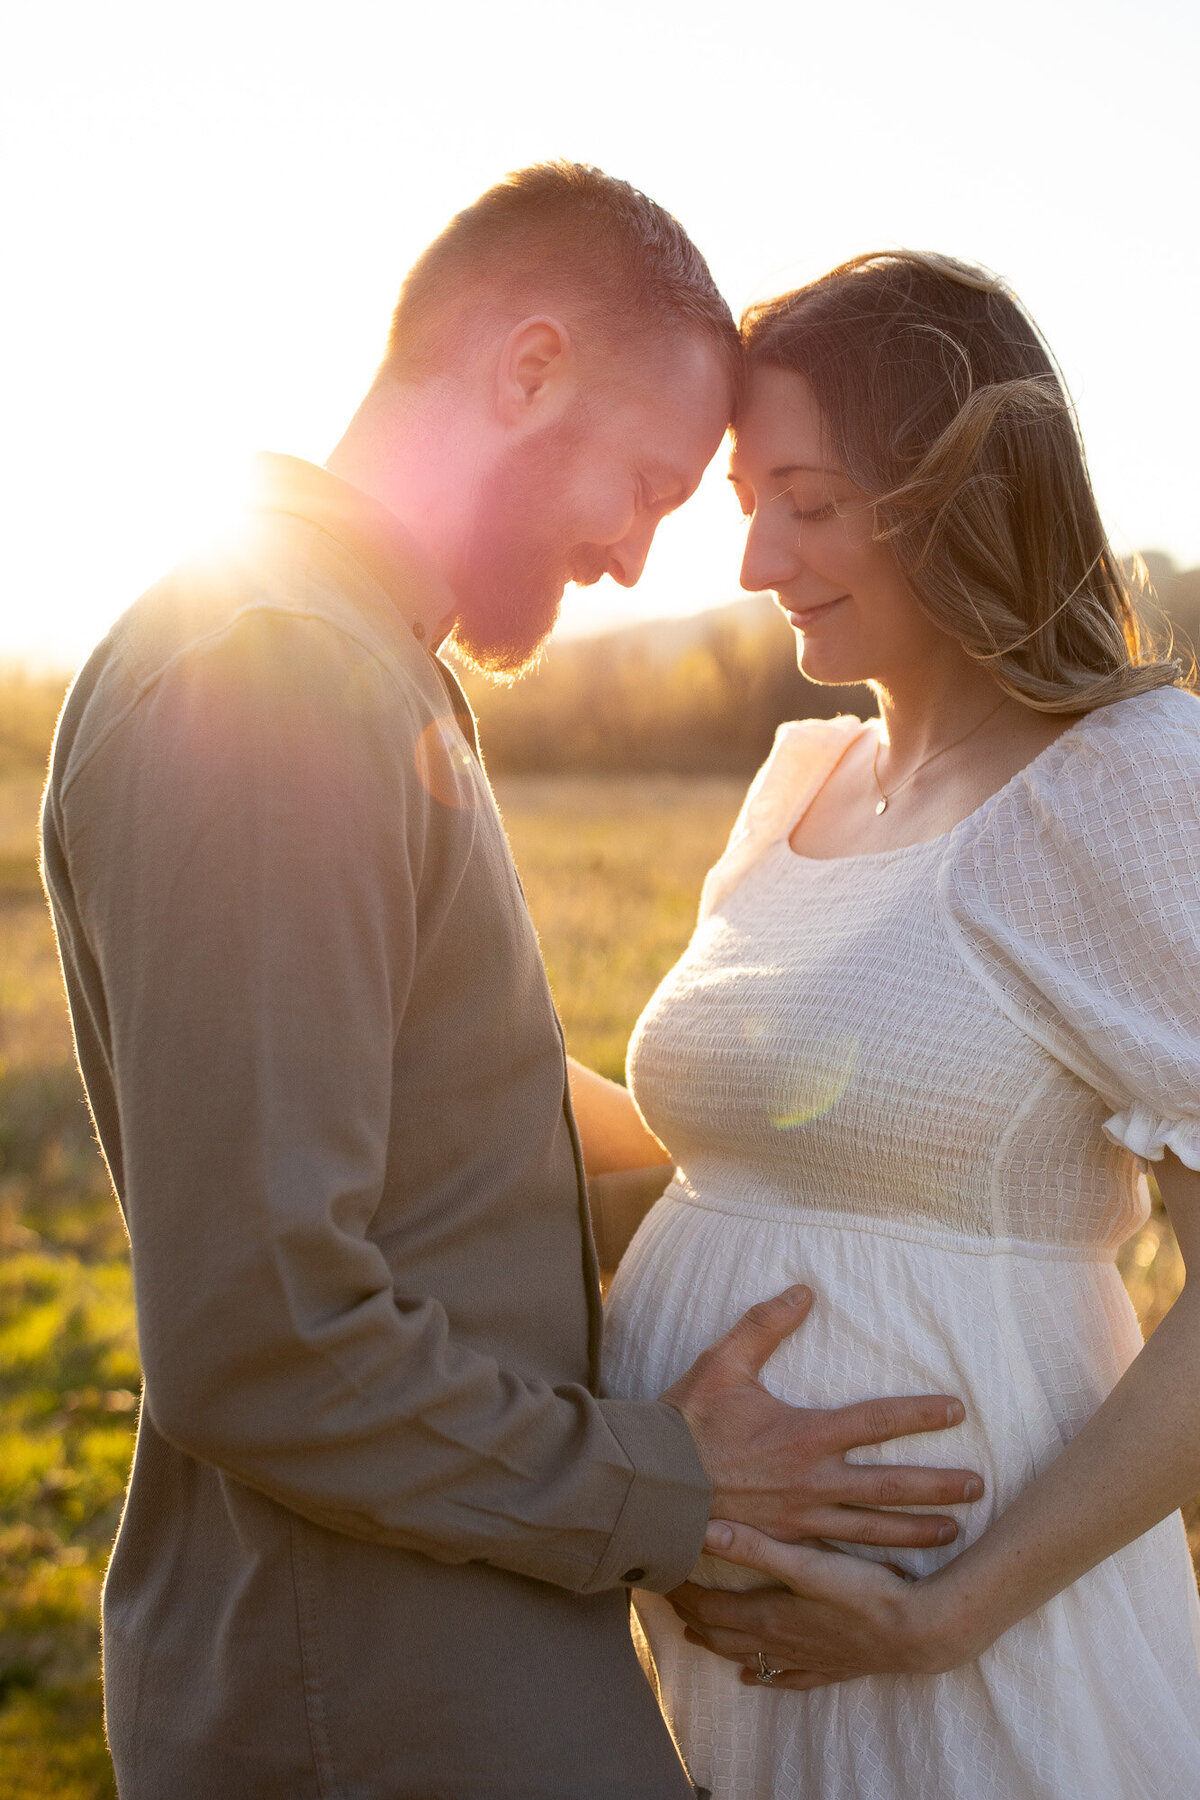 Couple holding woman's pregnant belly at sunset in a field.